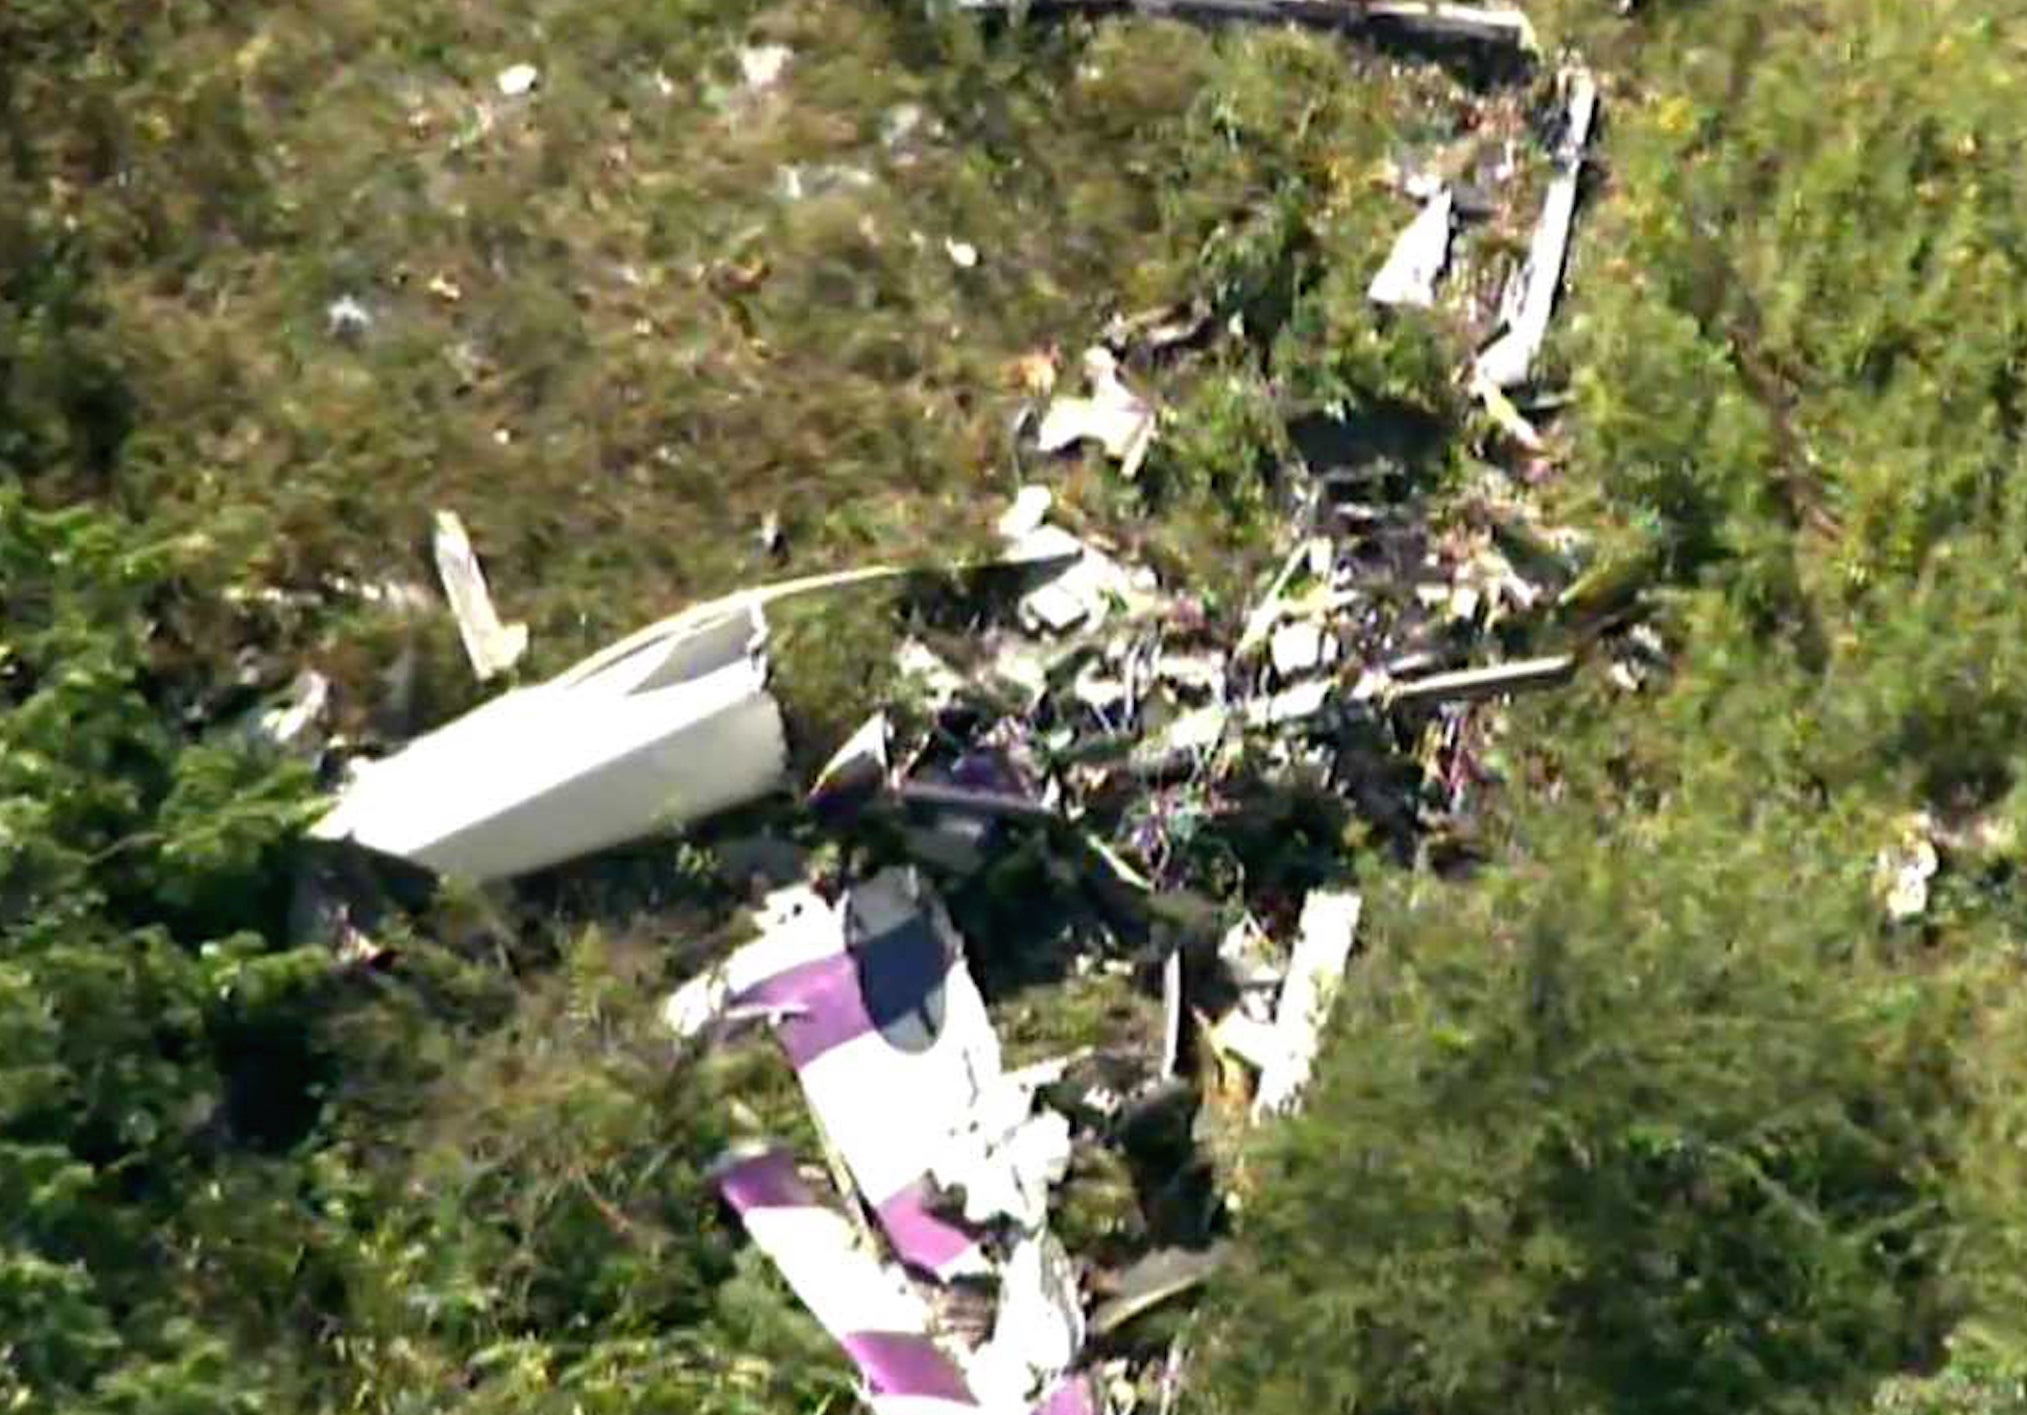 The wreckage of a stunt plane from WABC TV near Stuart Air Force Base in New York. (WABC/abc7NY.com/Associated Press)